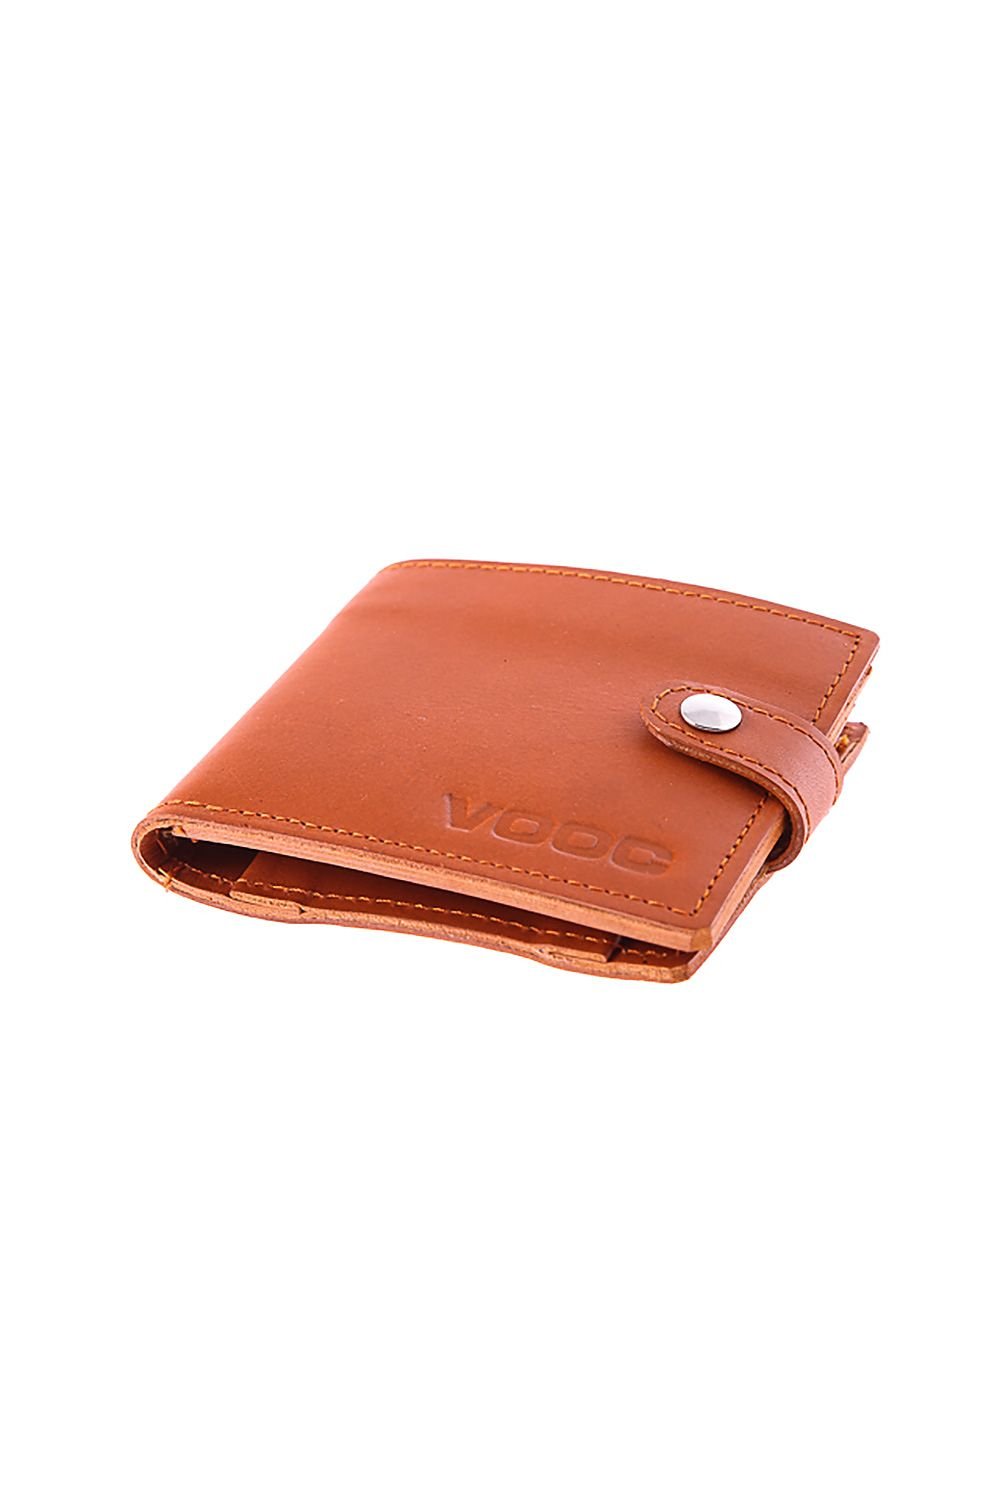 "Secure Your Style, Safeguard Your Essentials: Grab Our Sleek Wallet by Verosoft